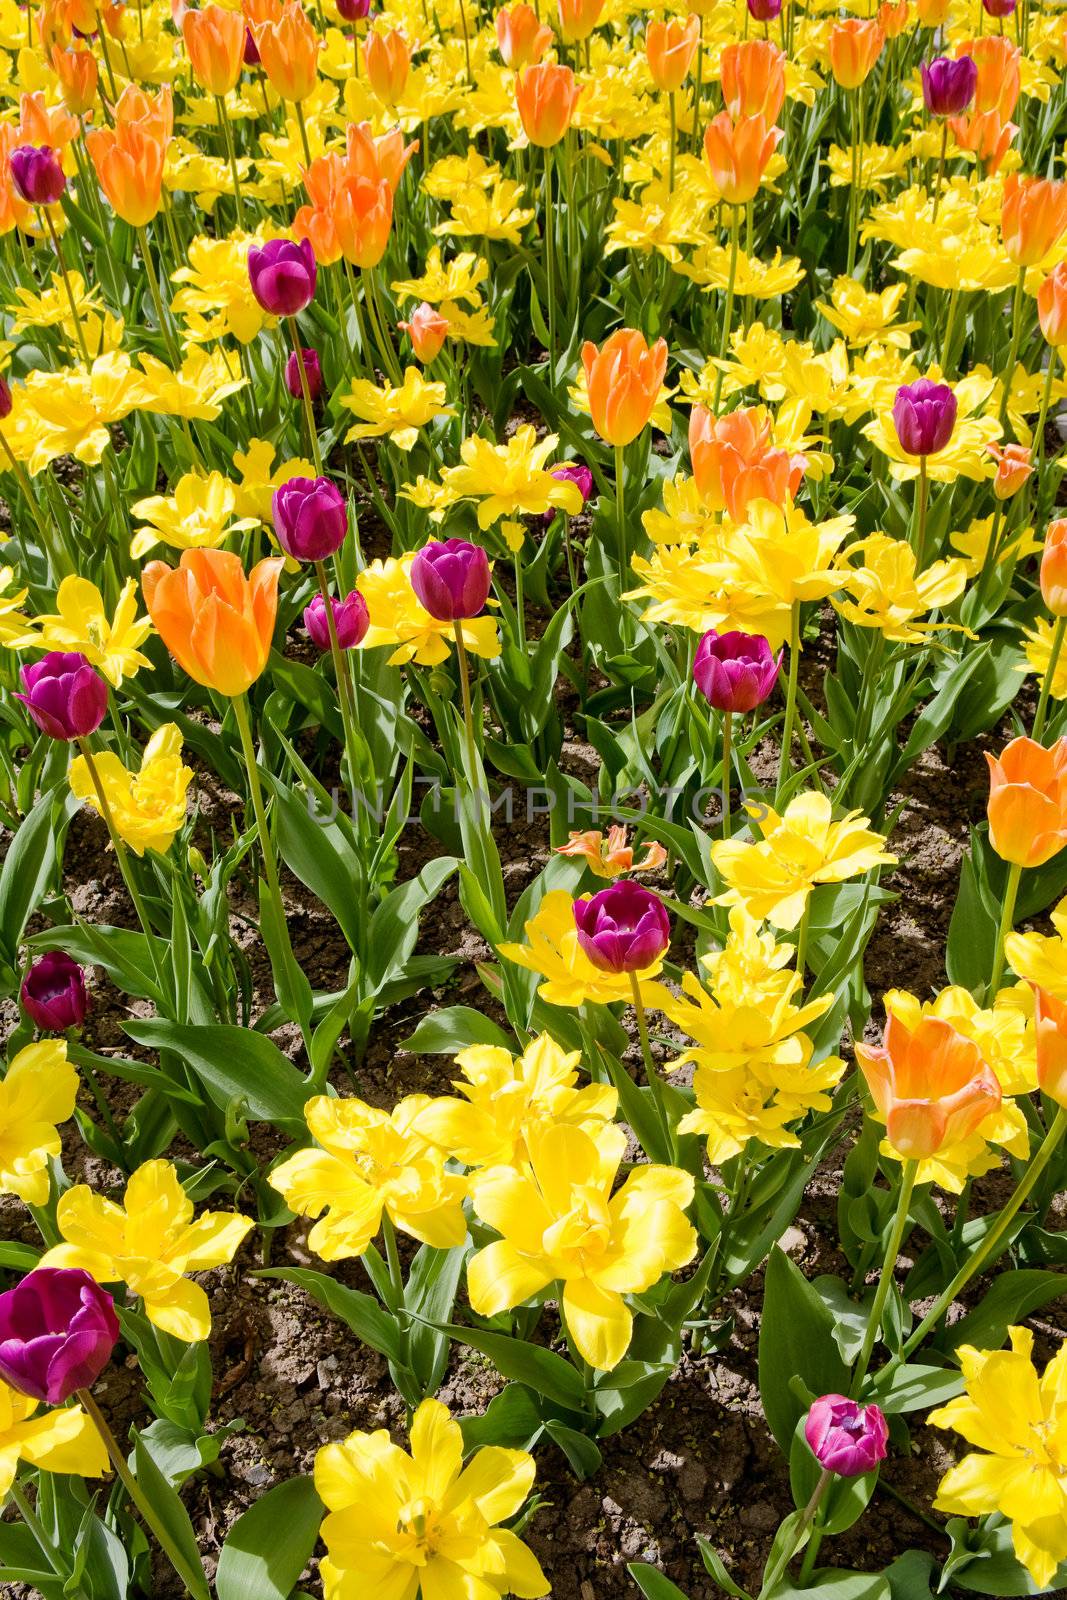 A flower bed with yellow orange and purple tulips and daffodils